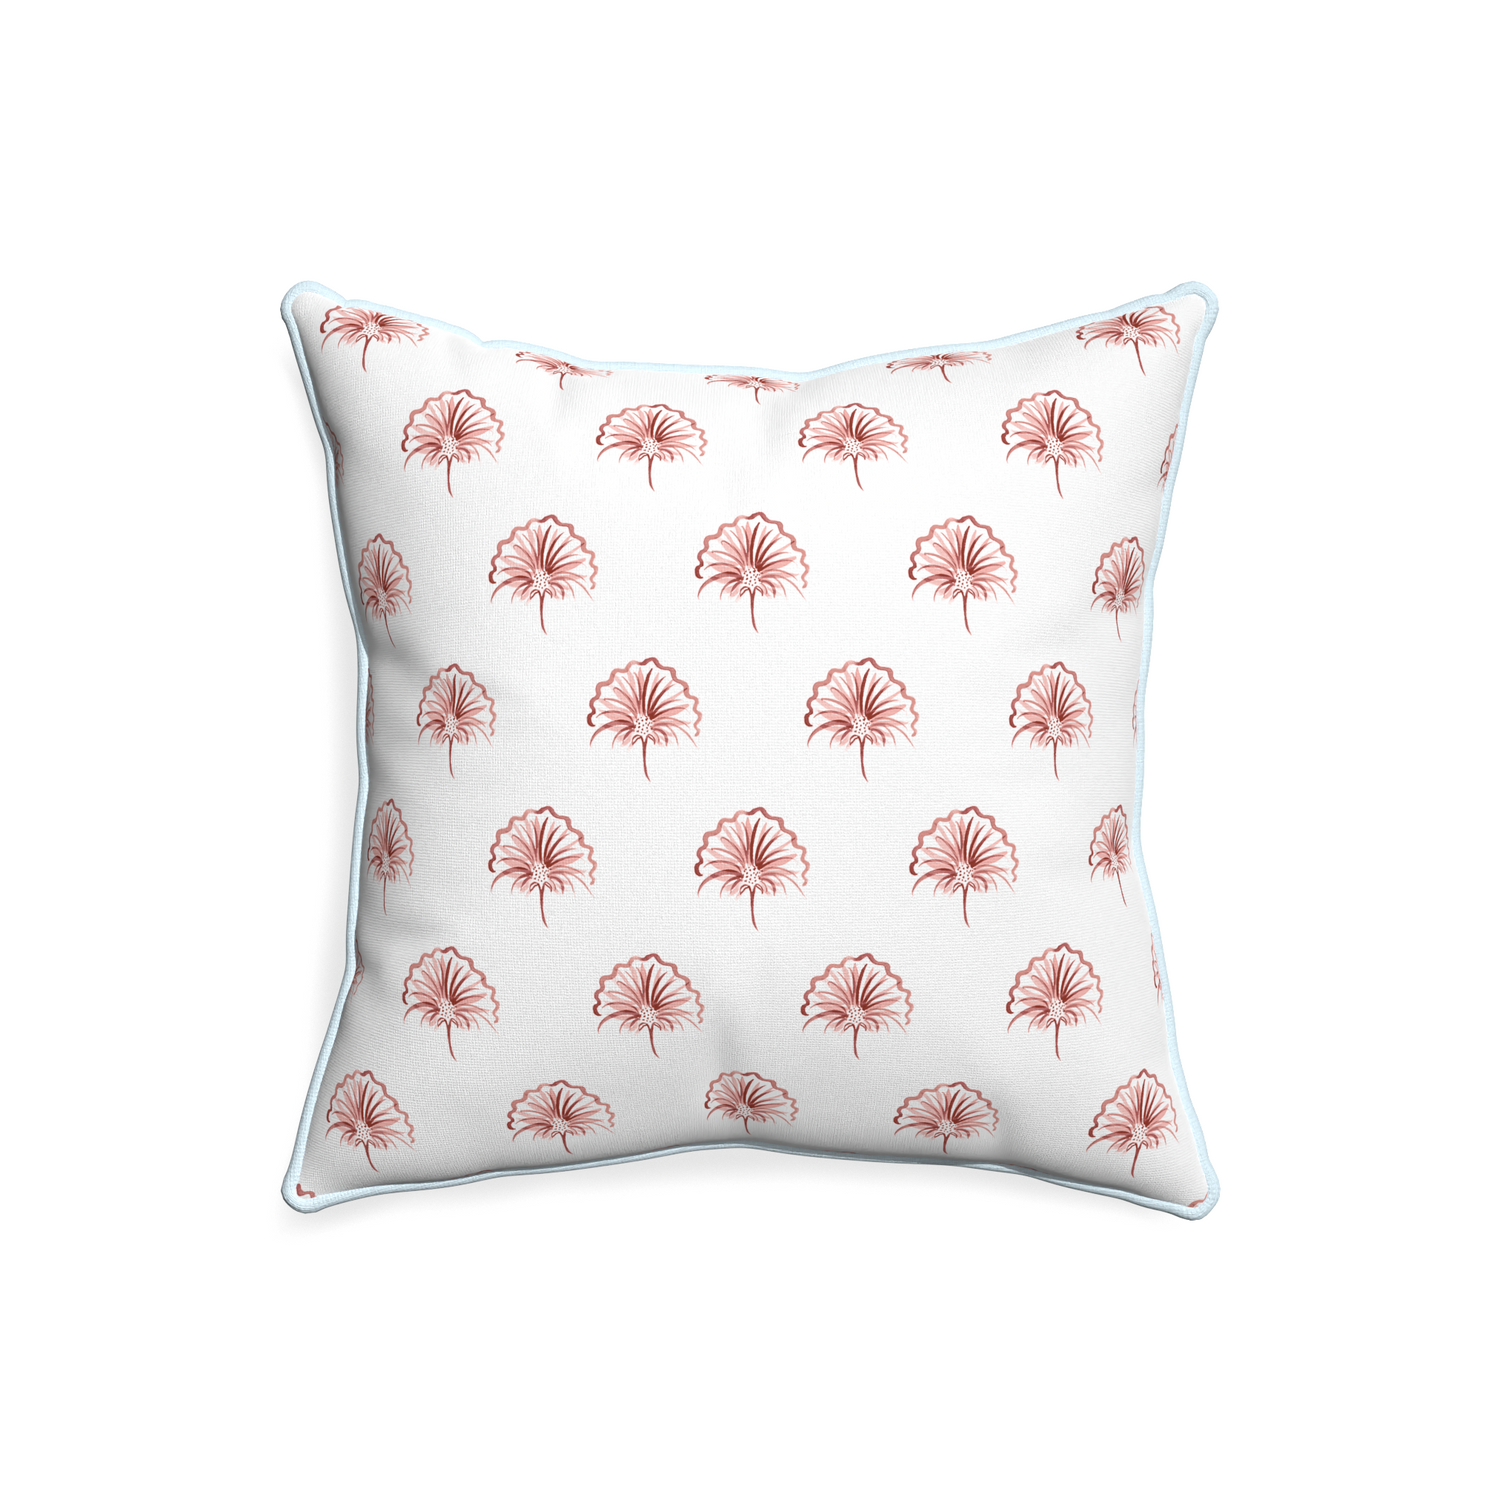 20-square penelope rose custom floral pinkpillow with powder piping on white background